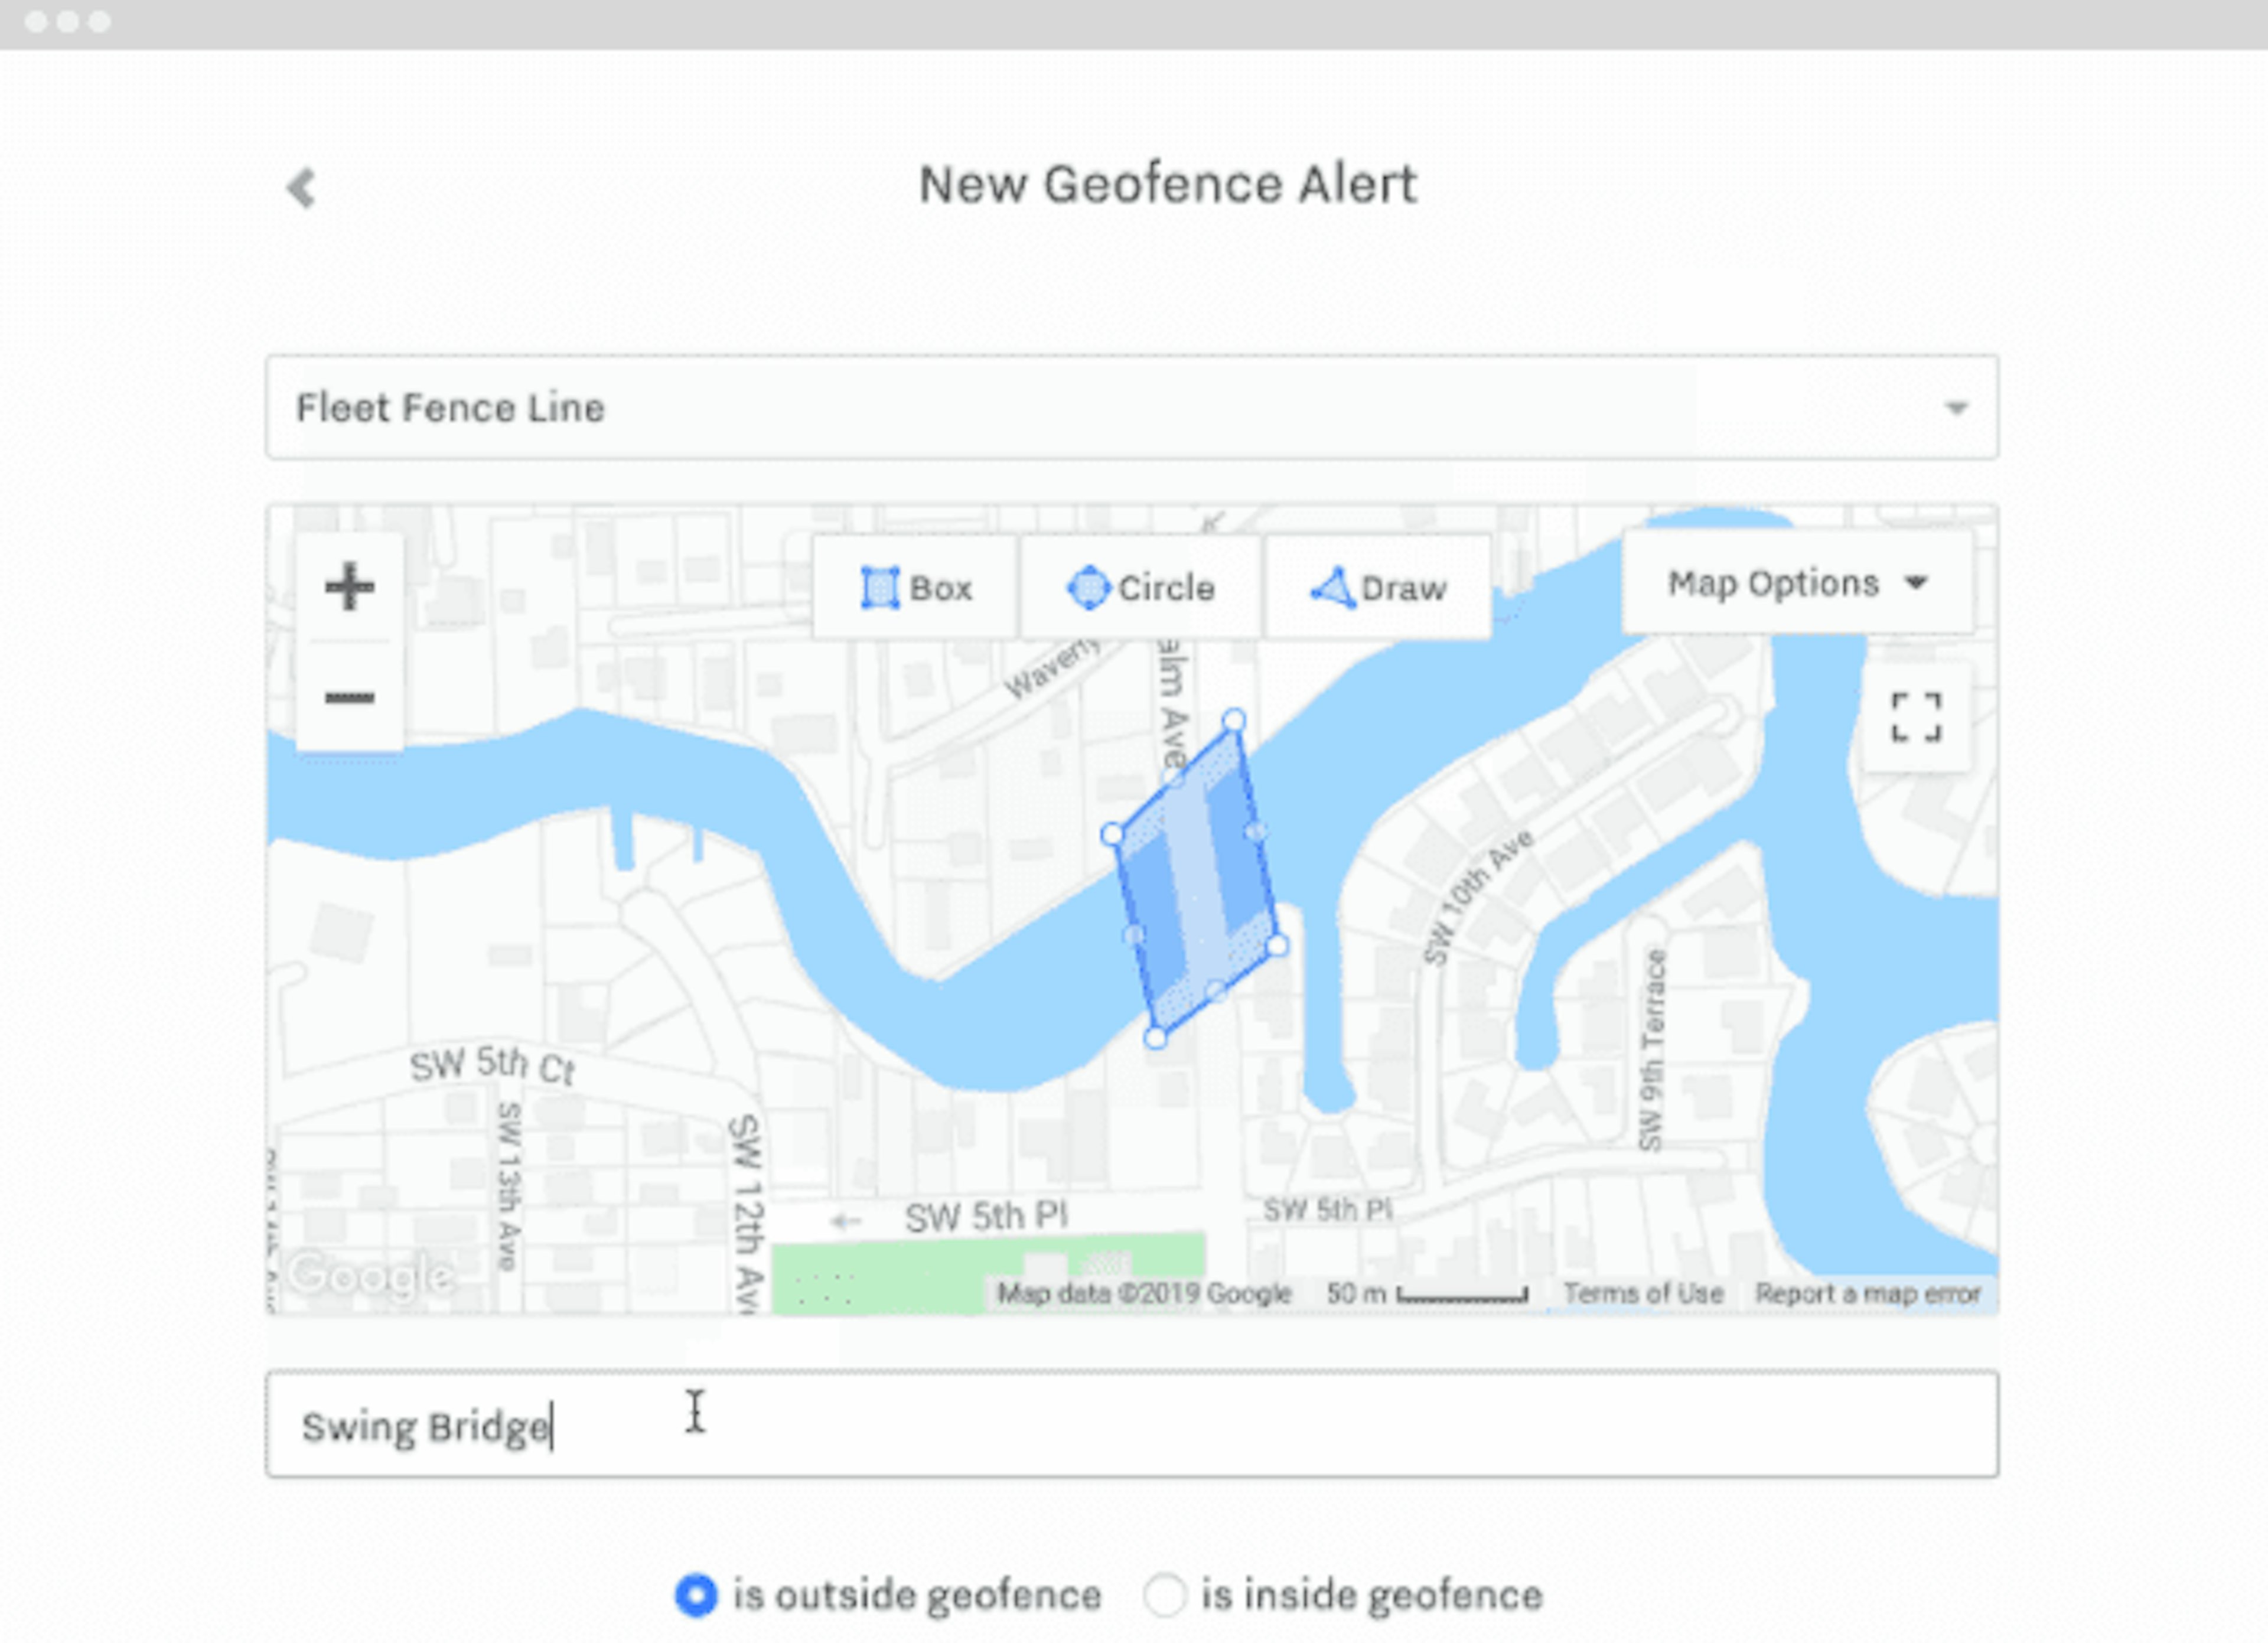 New Geofence Alert: Set up specific notifications